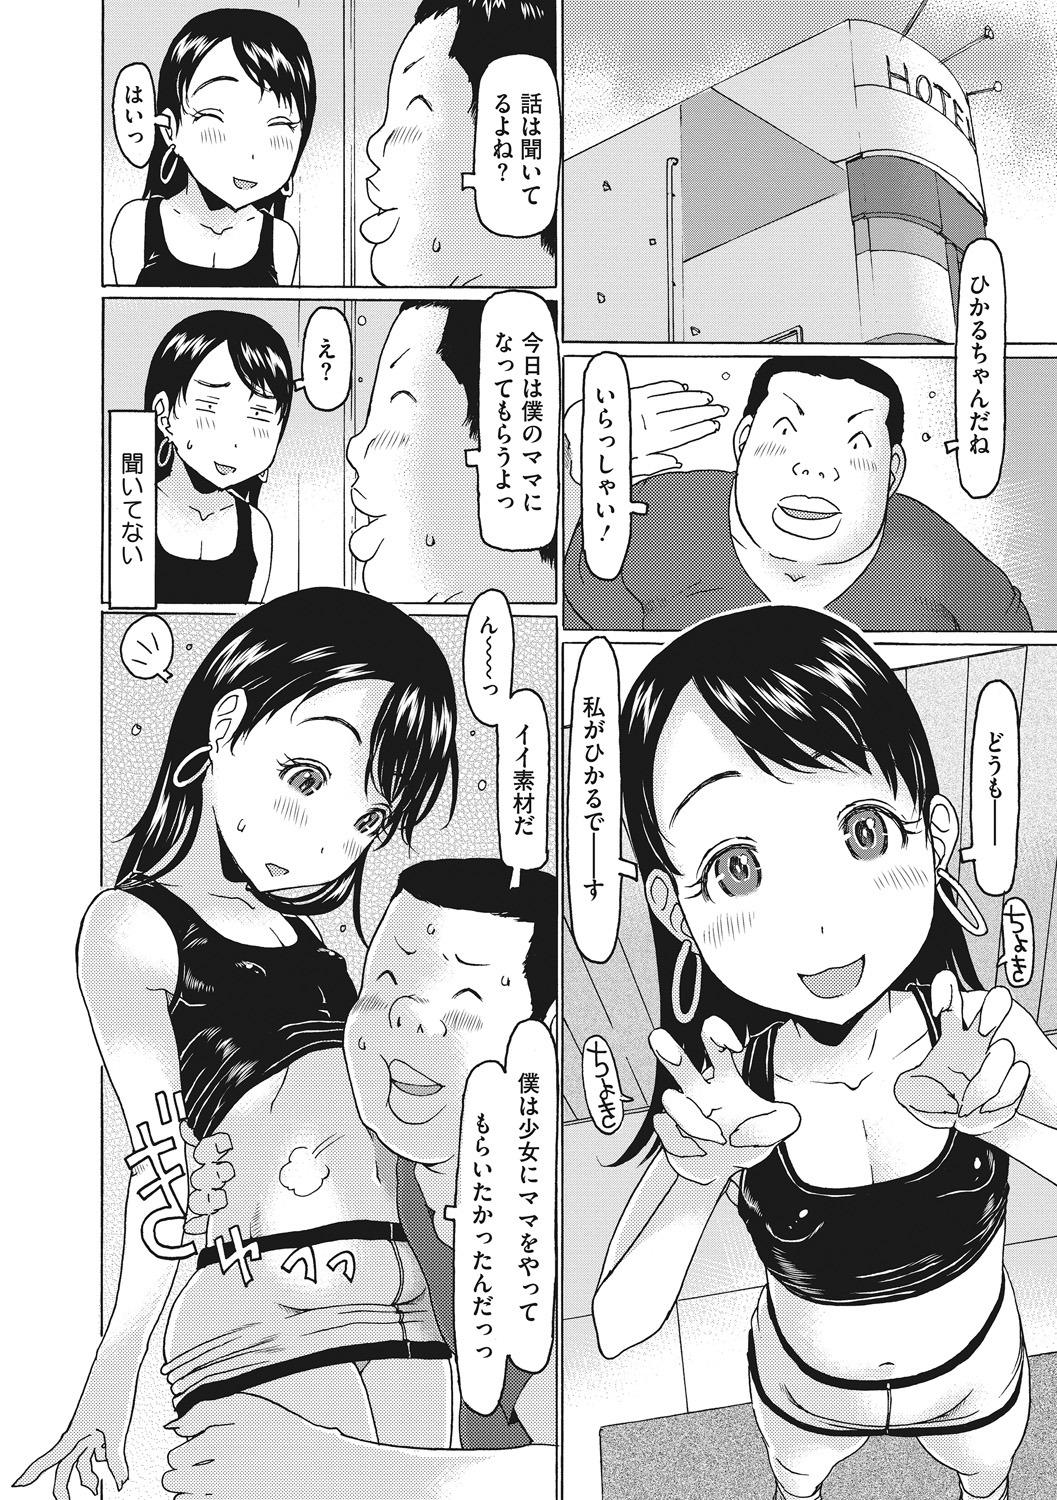 Leite Little Girl Strike Vol. 5 Off - Page 8